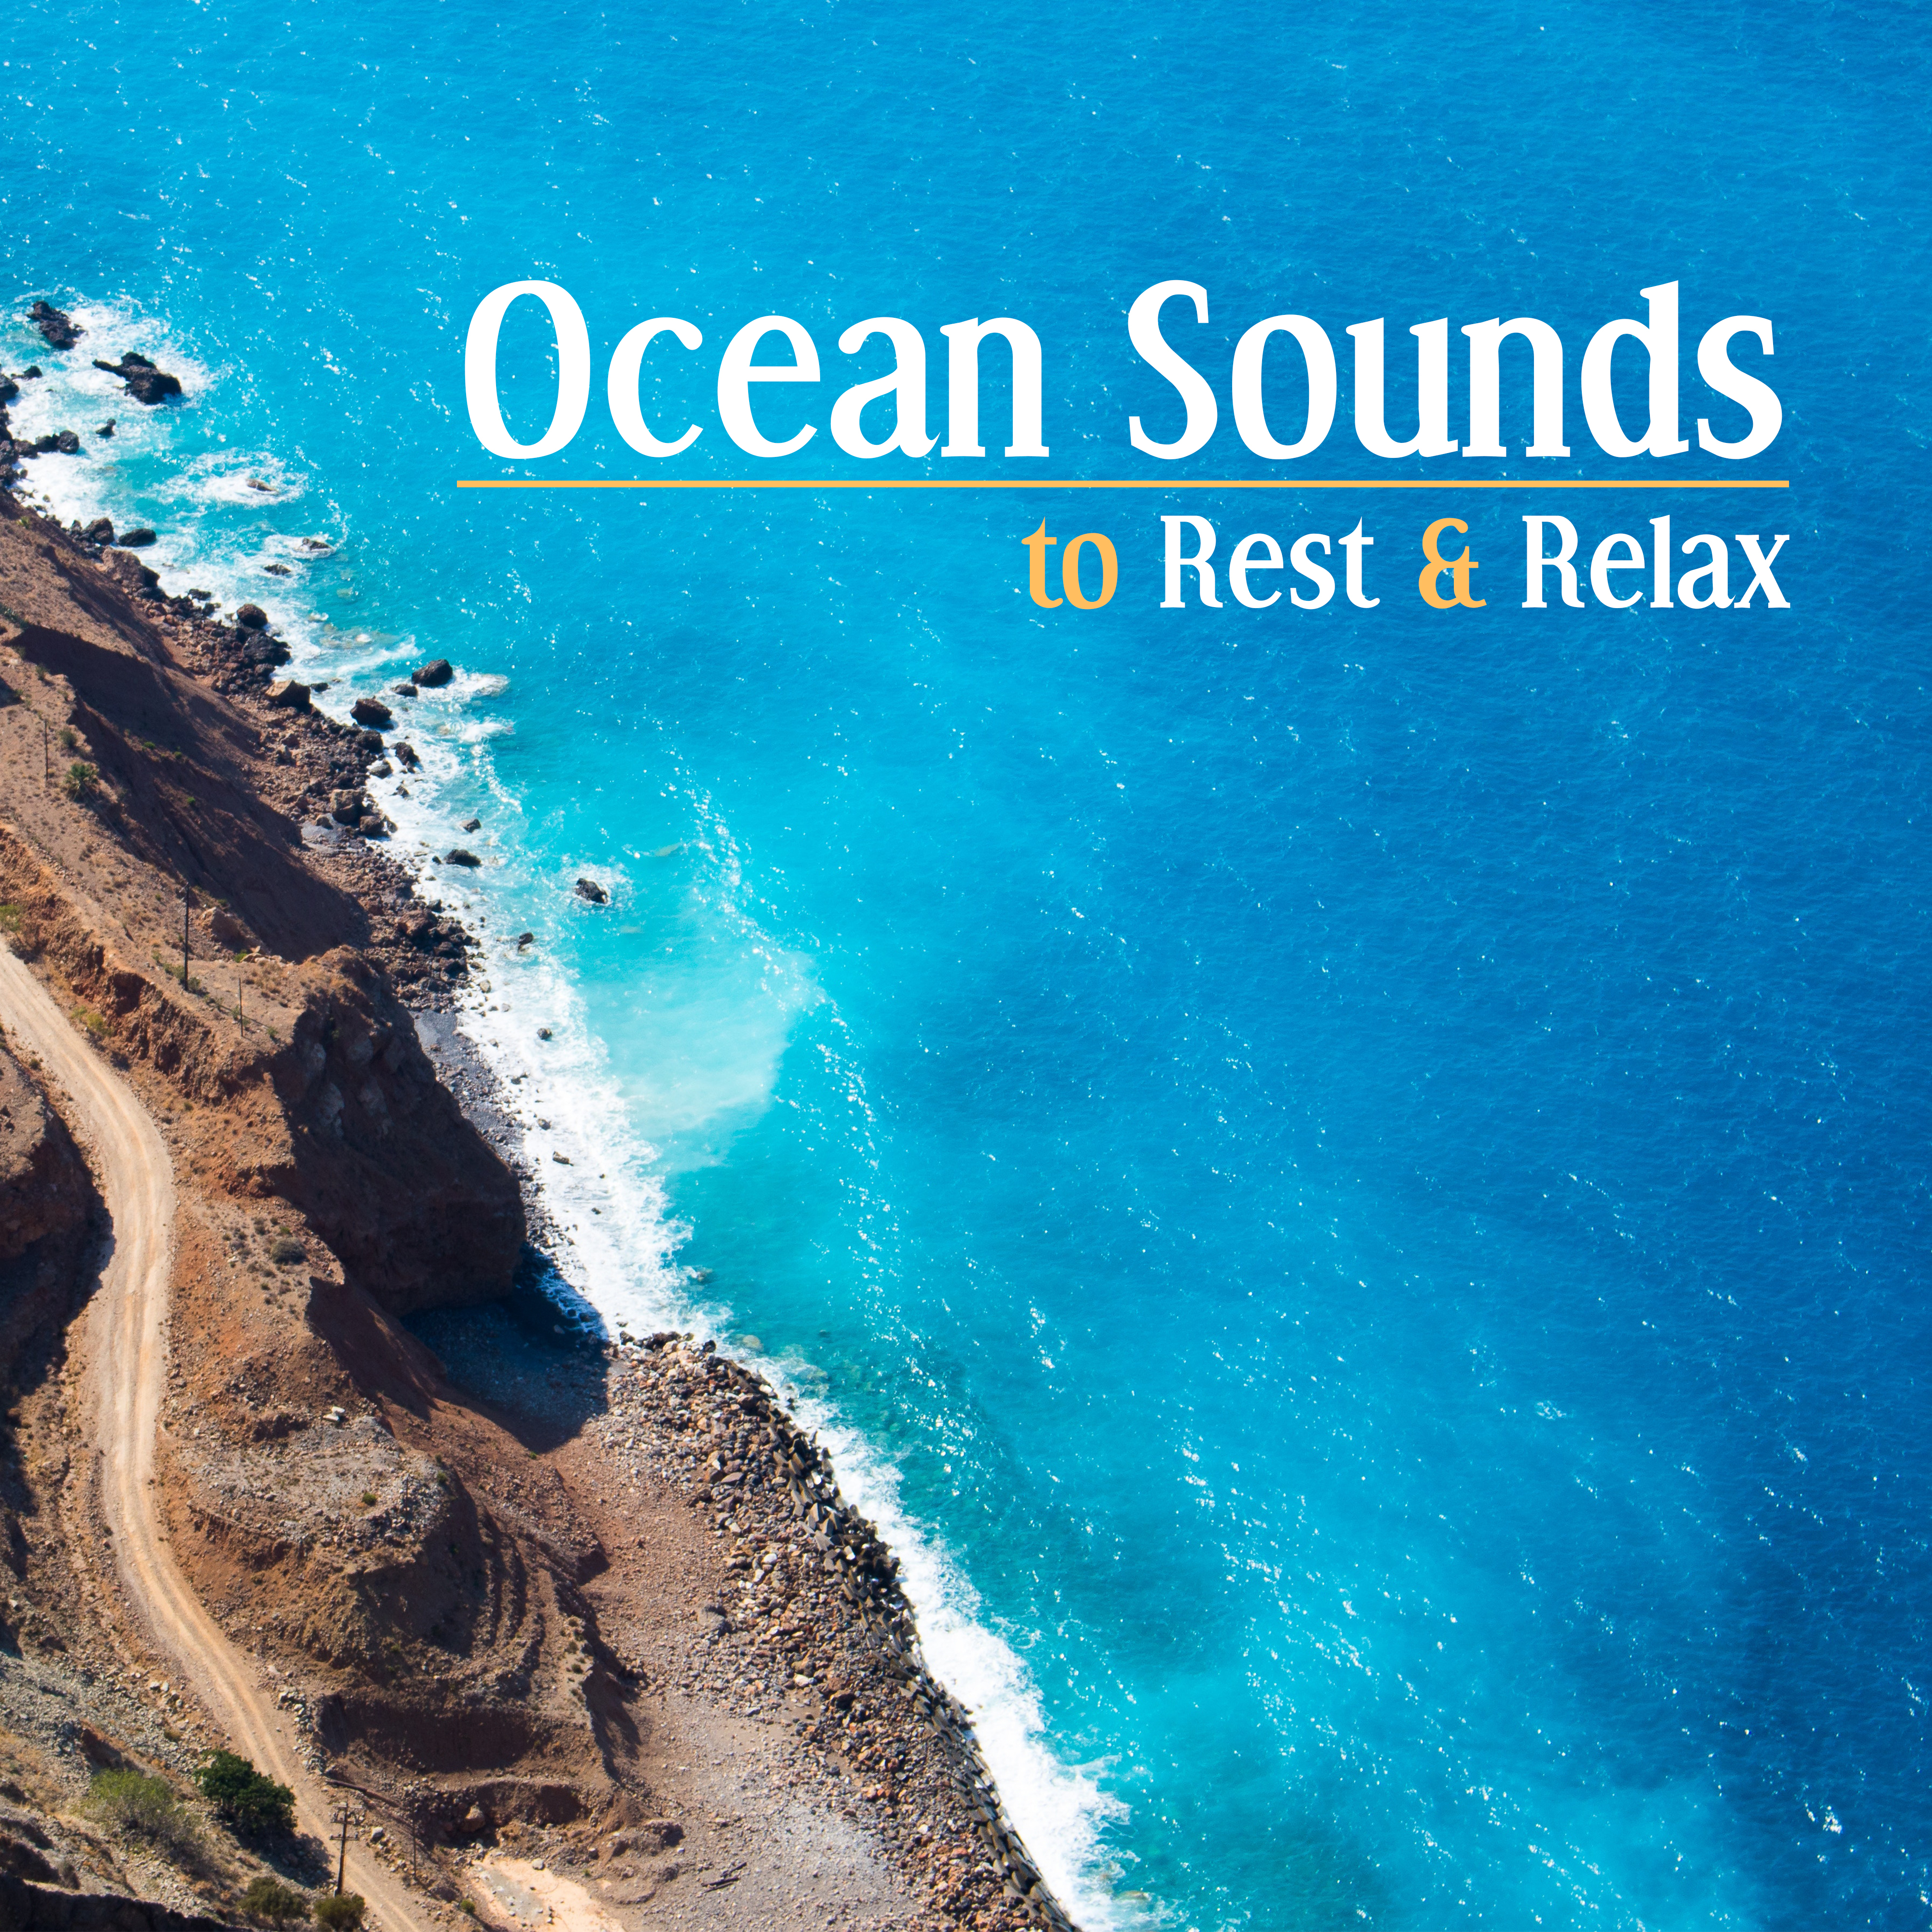 Ocean Sounds to Rest & Relax – New Age Music, Best Relaxation Songs, Time to Calm Down, Mind Rest